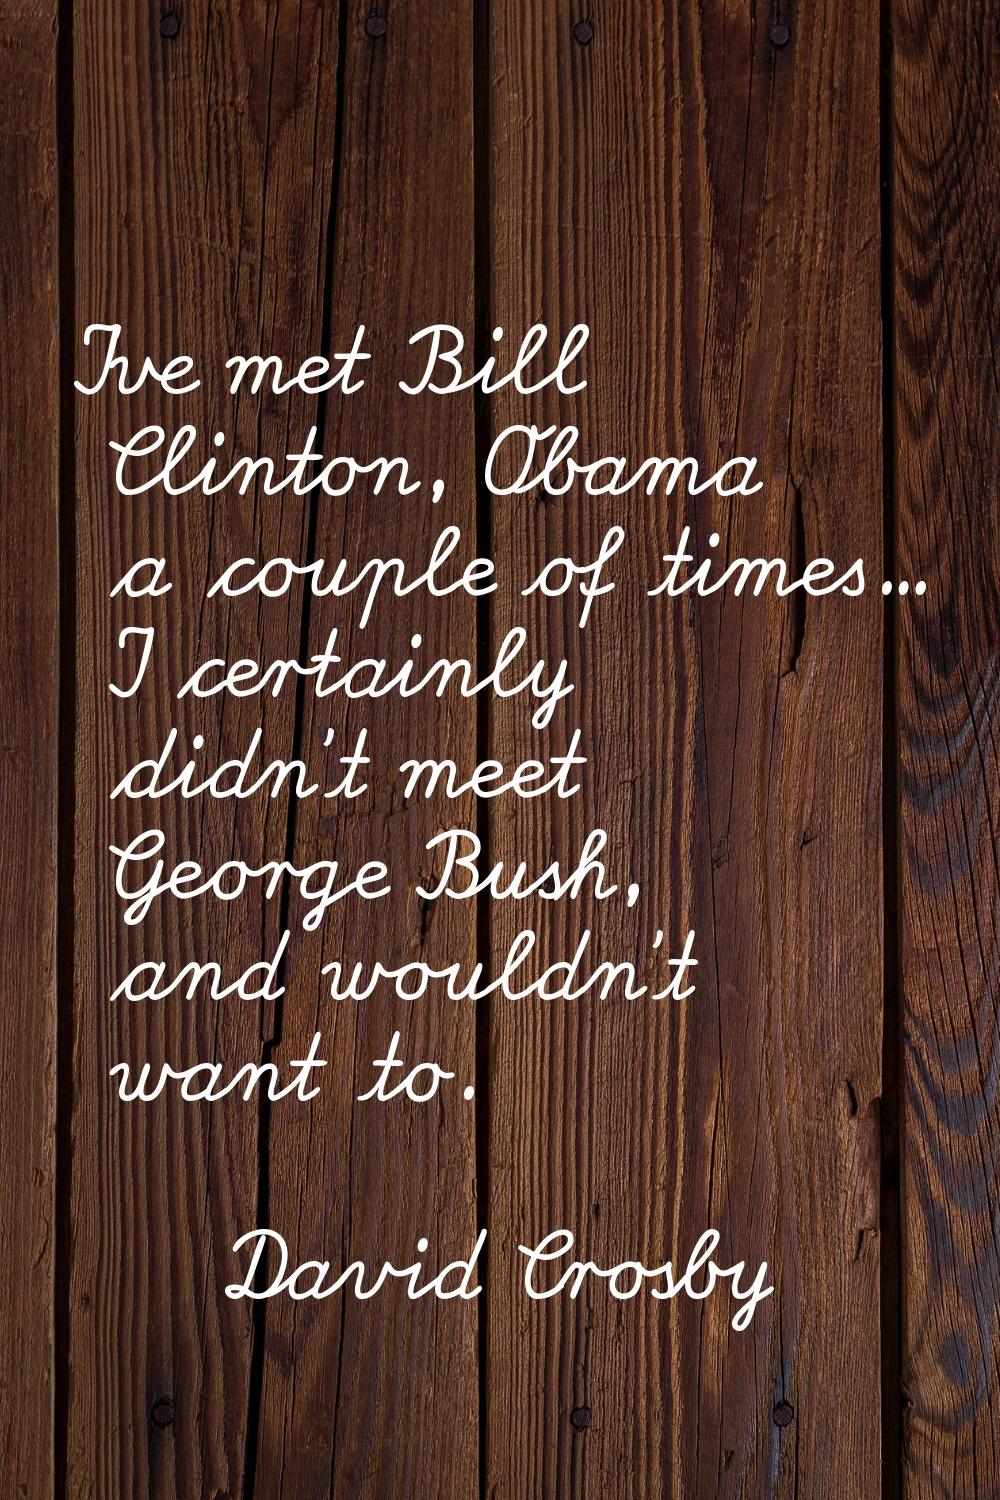 I've met Bill Clinton, Obama a couple of times... I certainly didn't meet George Bush, and wouldn't